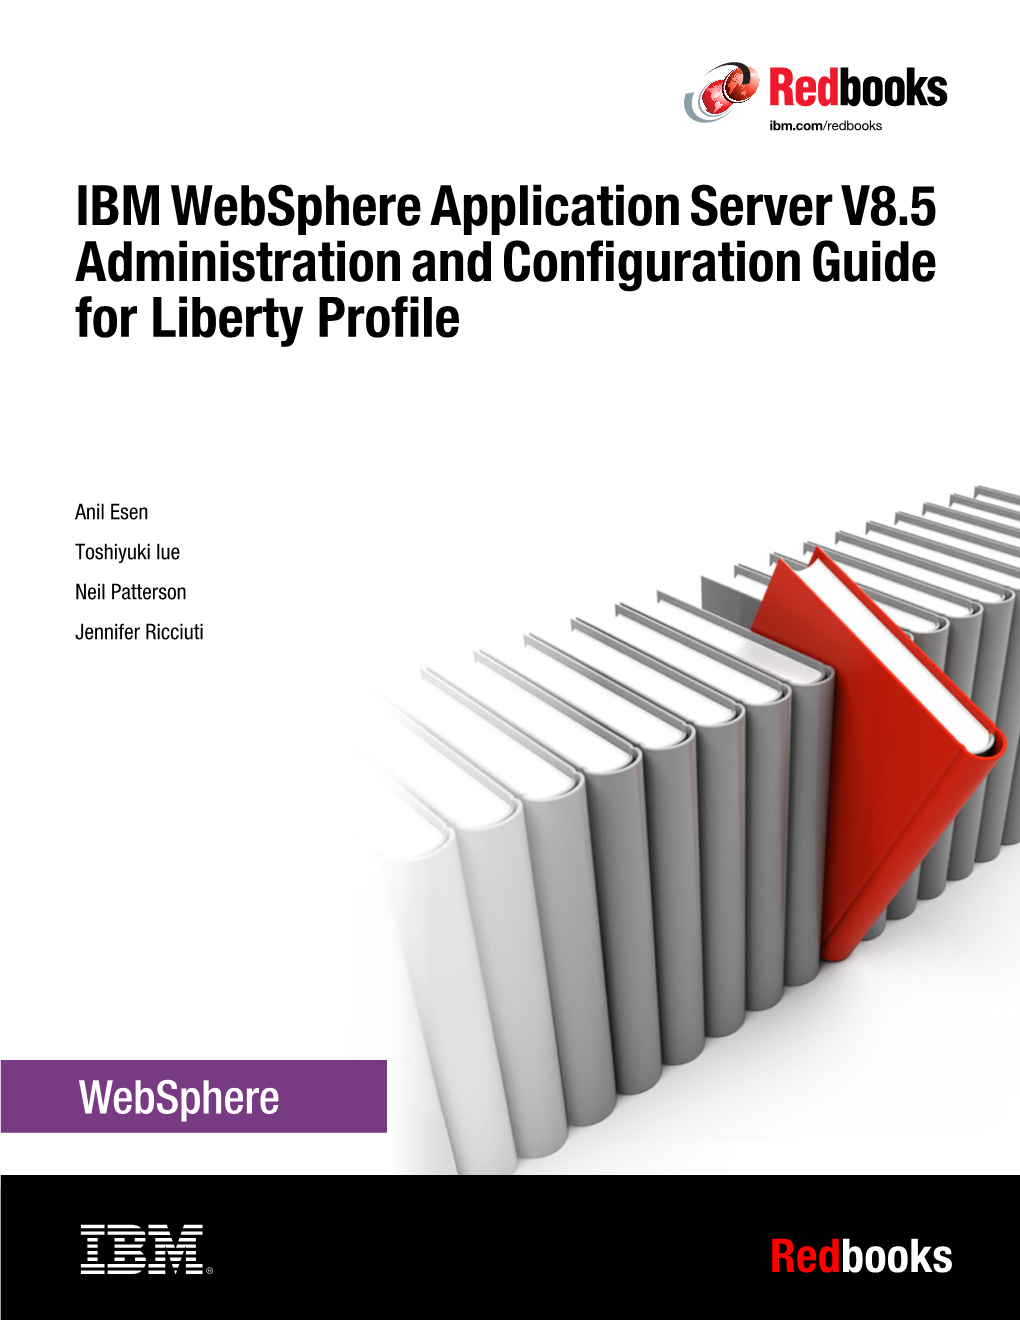 Websphere Application Server V8.5 Administration and Configuration Guide for Liberty Profile